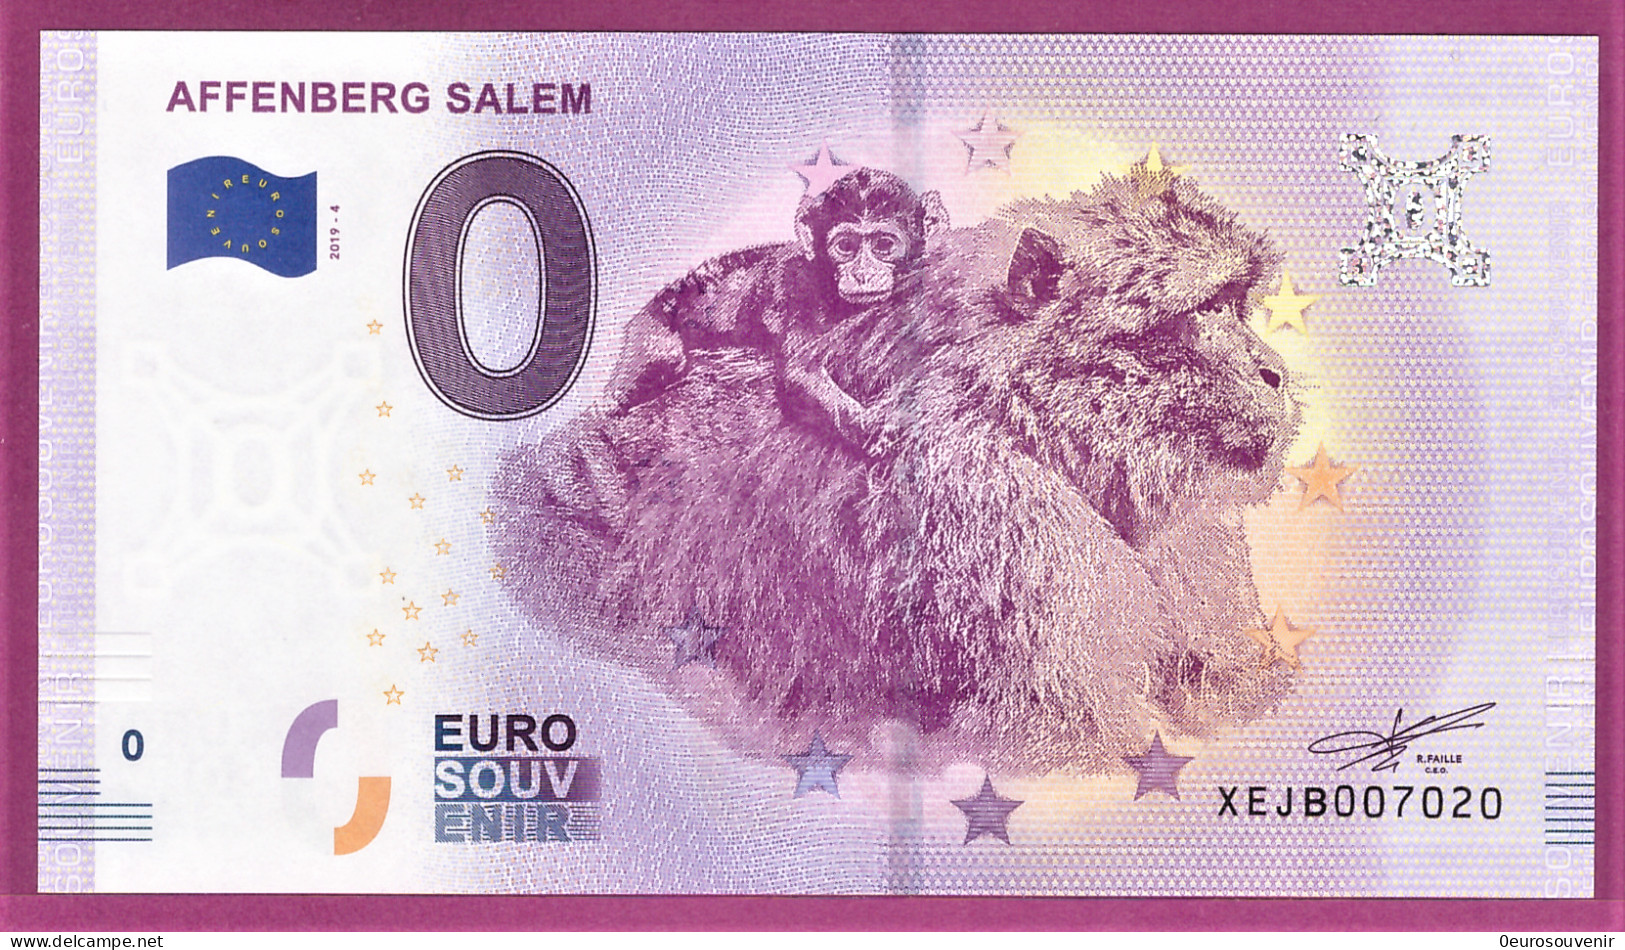 0-Euro XEJB 2019-4 AFFENBERG SALEM - Private Proofs / Unofficial